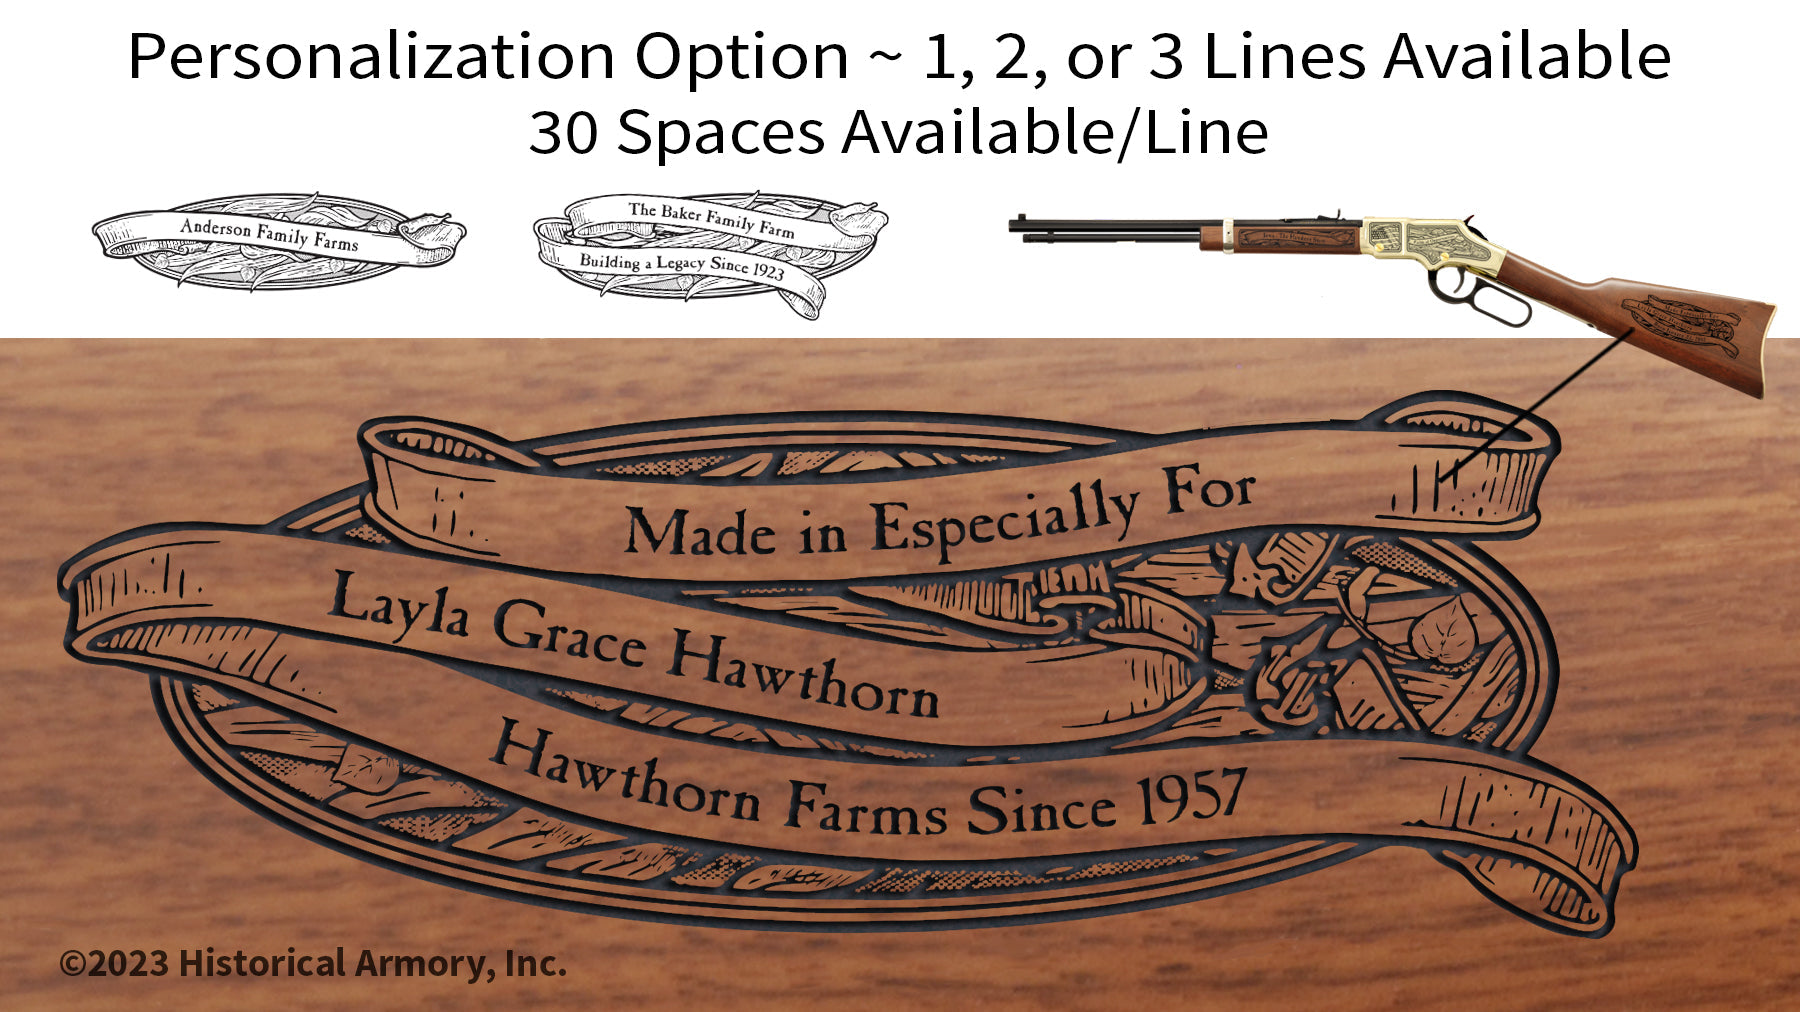 Mississippi Agricultural Heritage Engraved Rifle Personalization